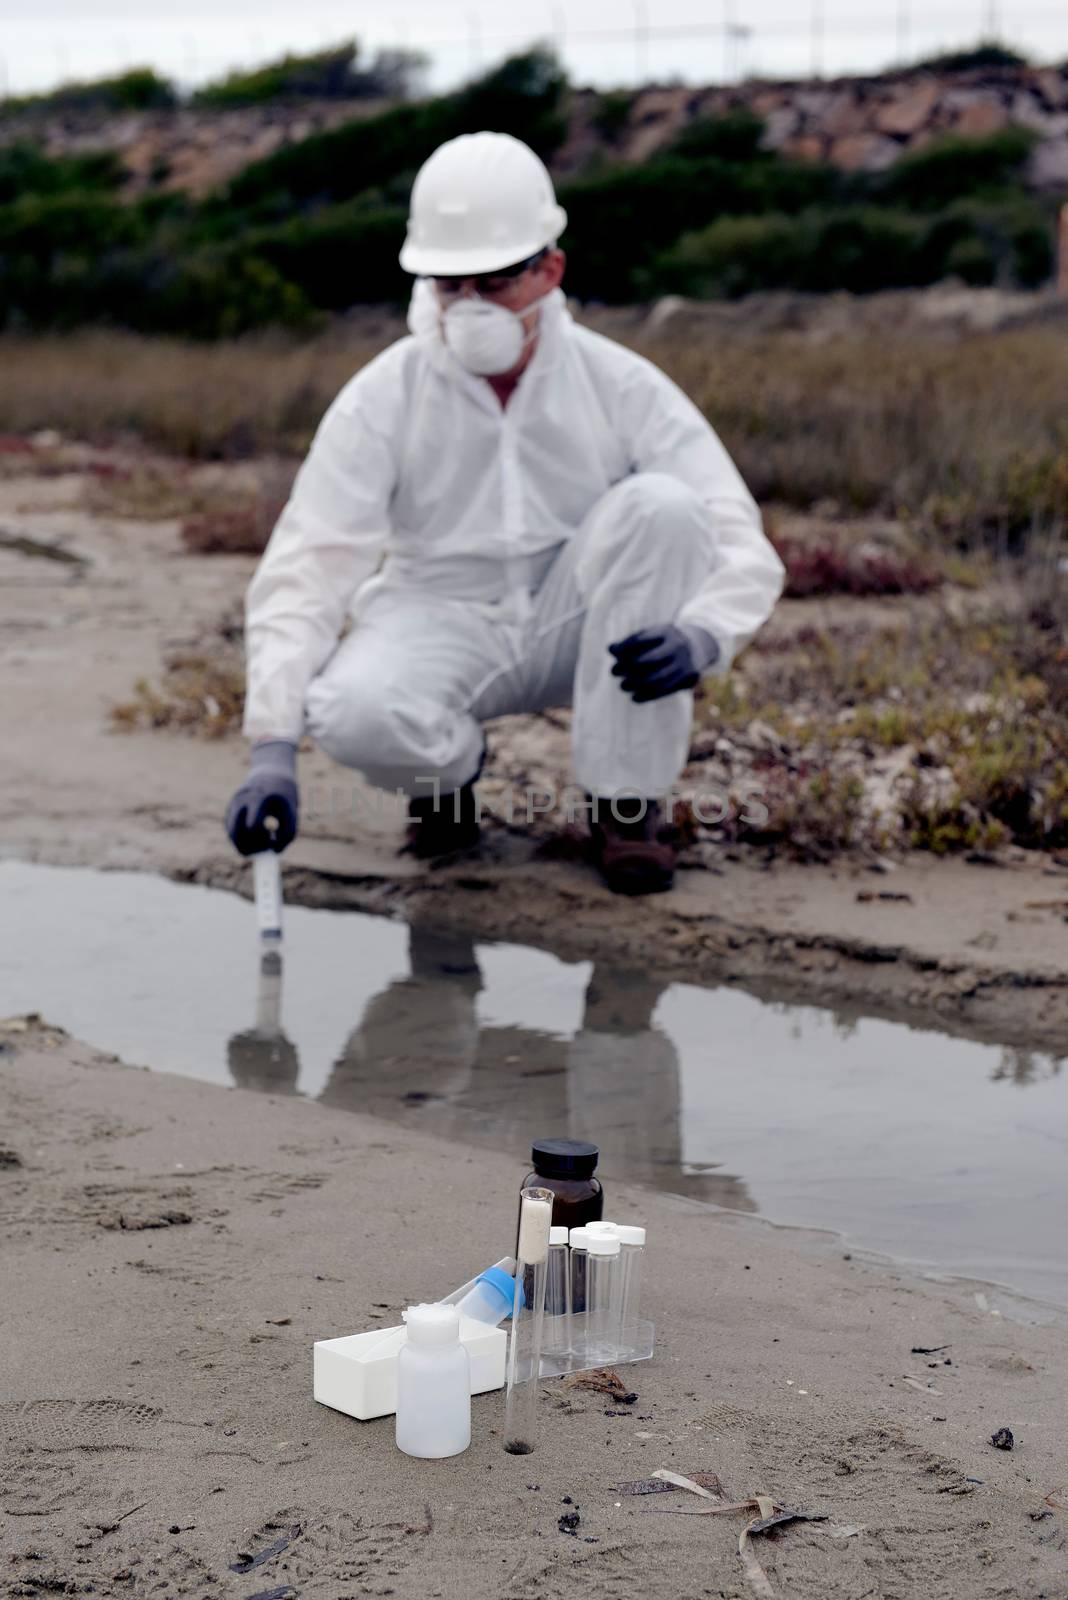 
Worker in a protective suit examining pollution in the water at the industry.